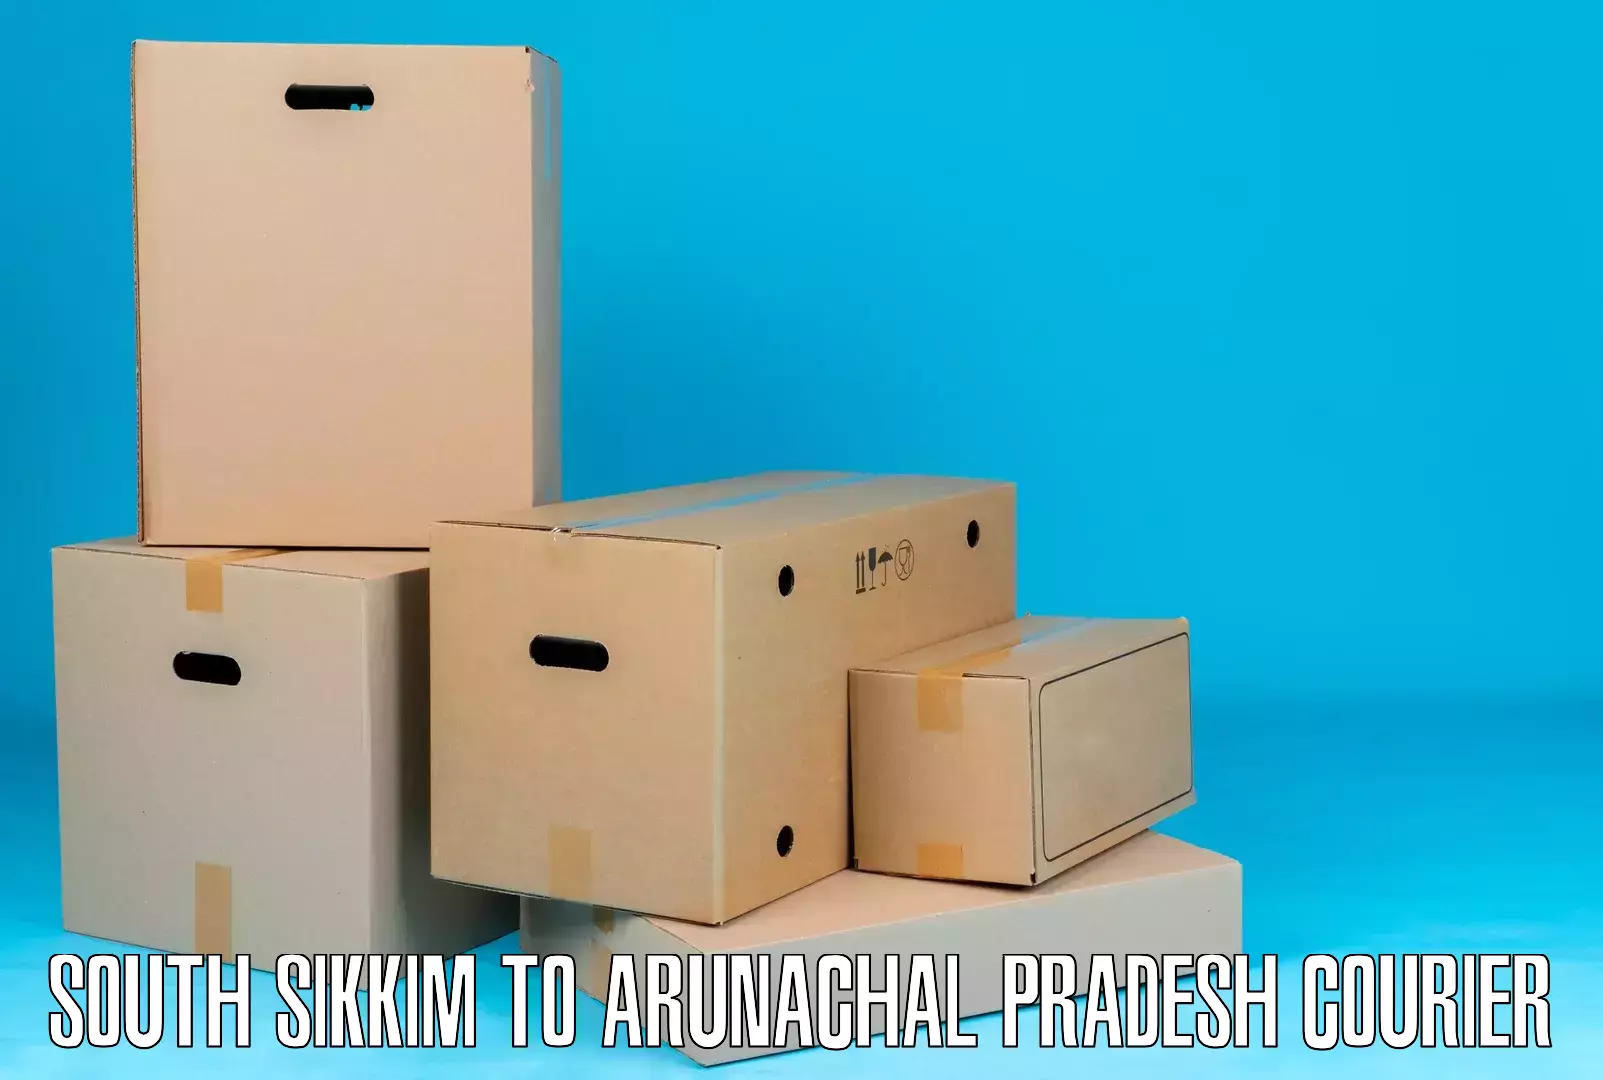 Urgent courier needs South Sikkim to Bomdila